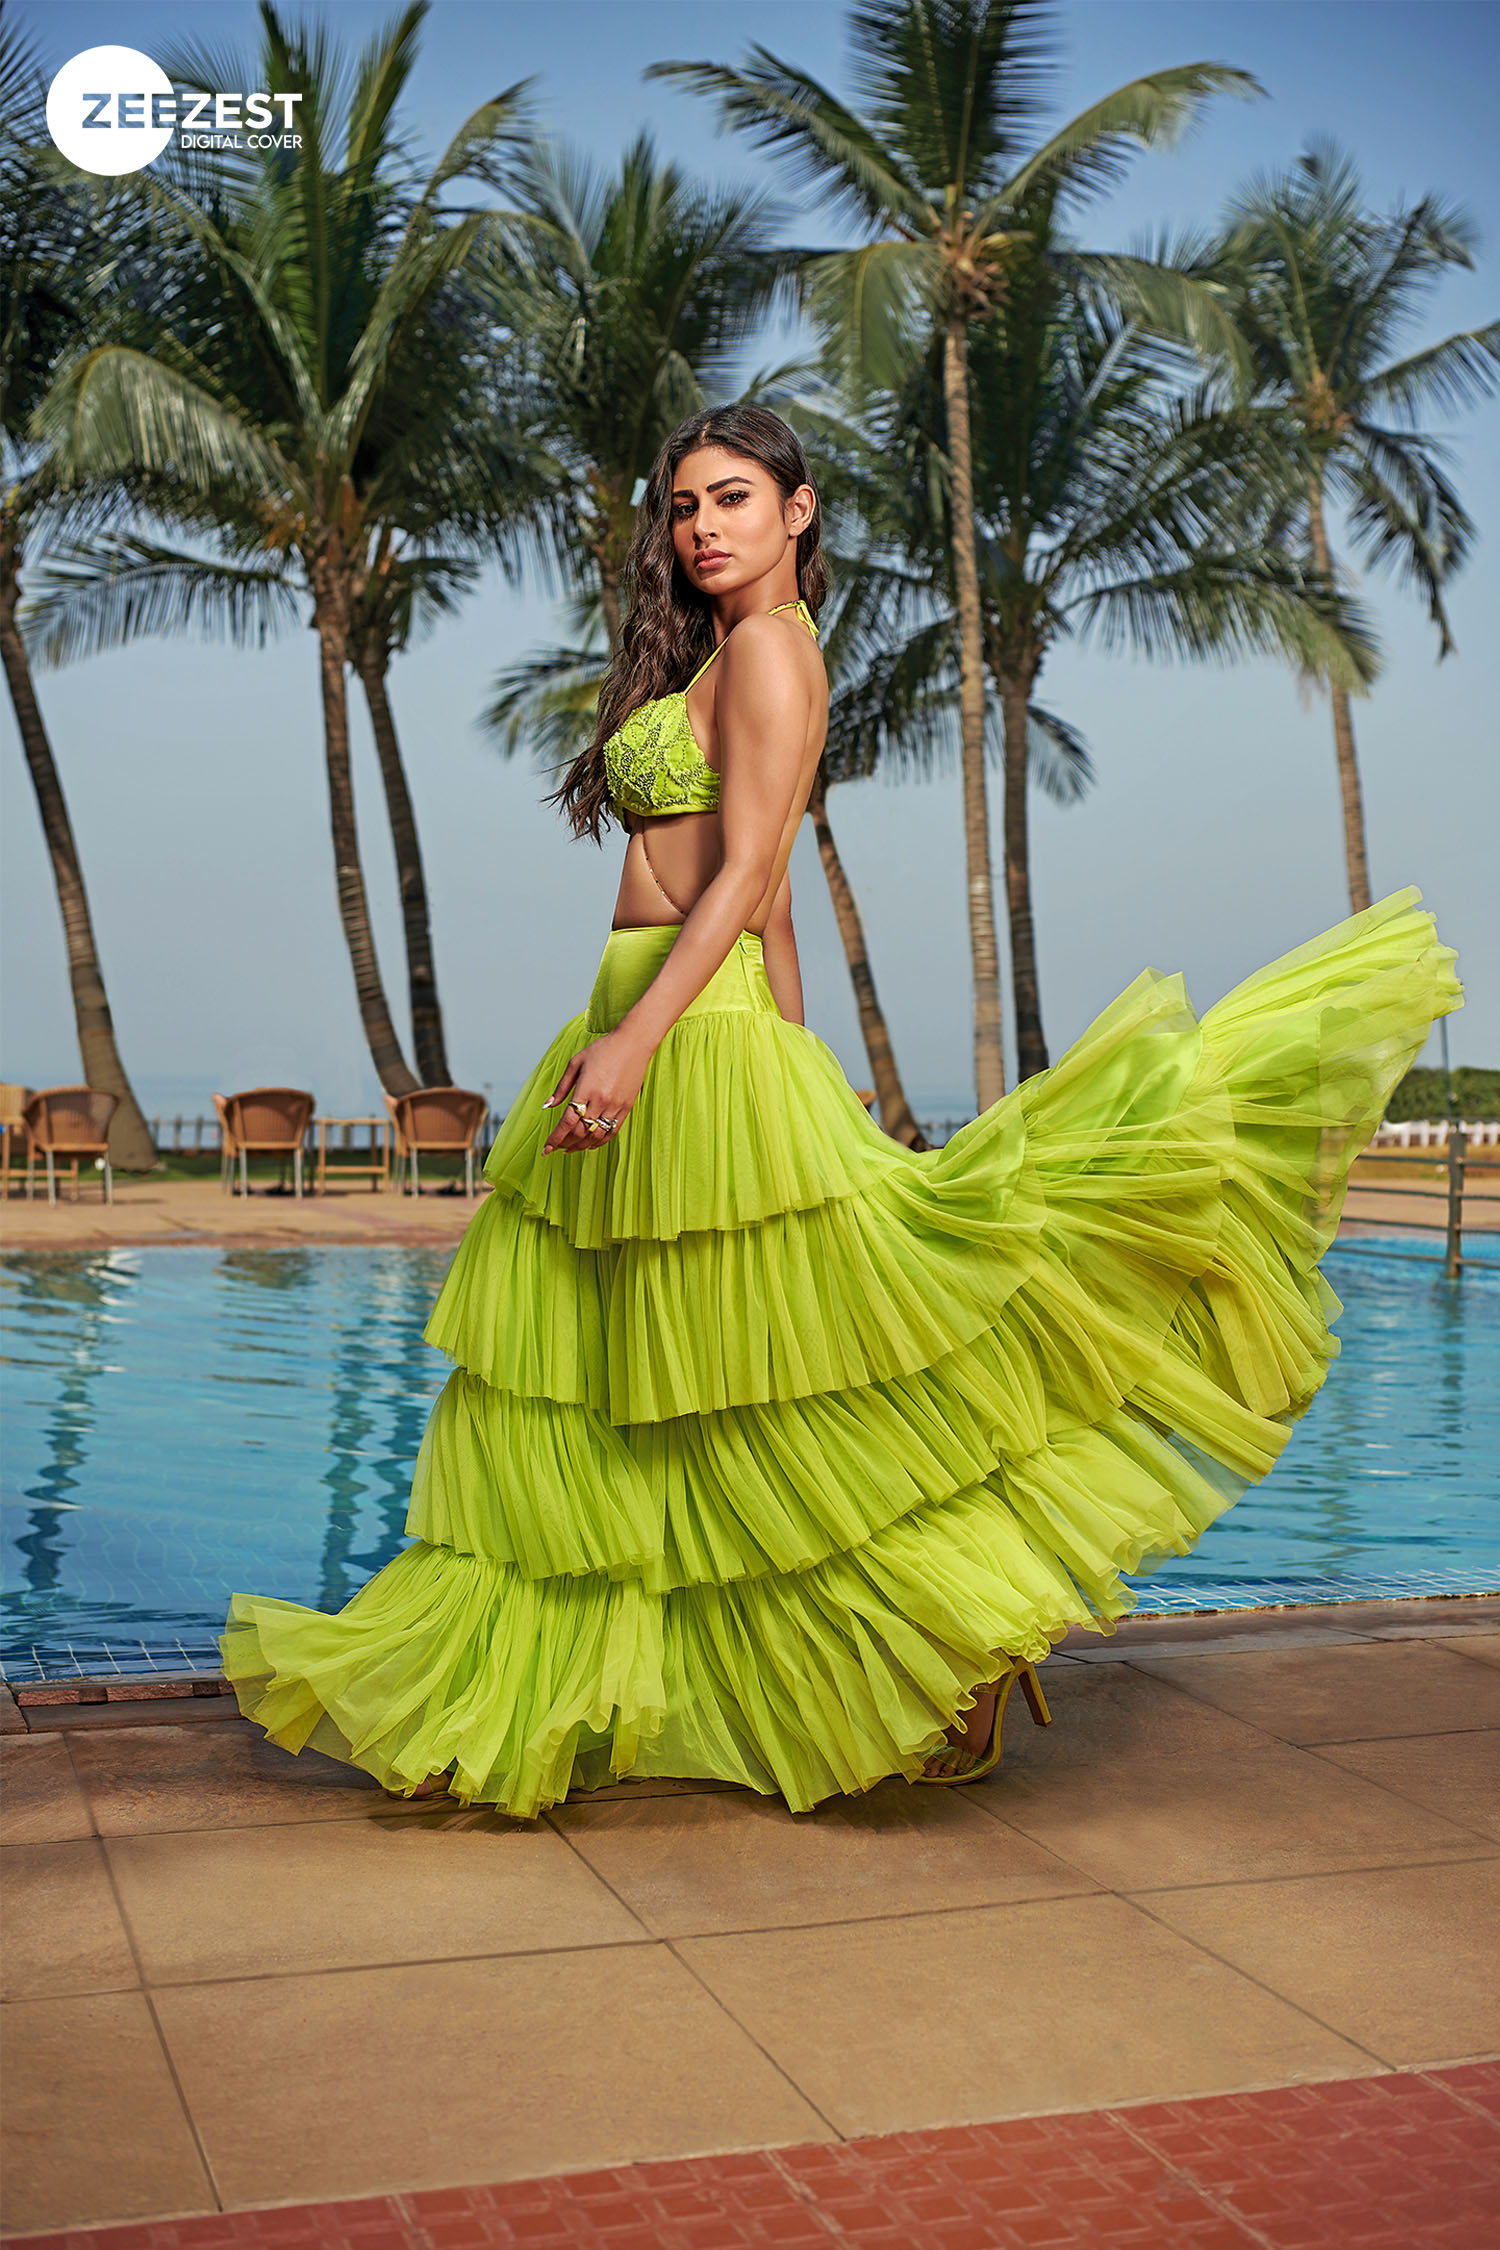 With Husband Suraj Nambiar On Vacation, Mouni Roy's Pool Day In A